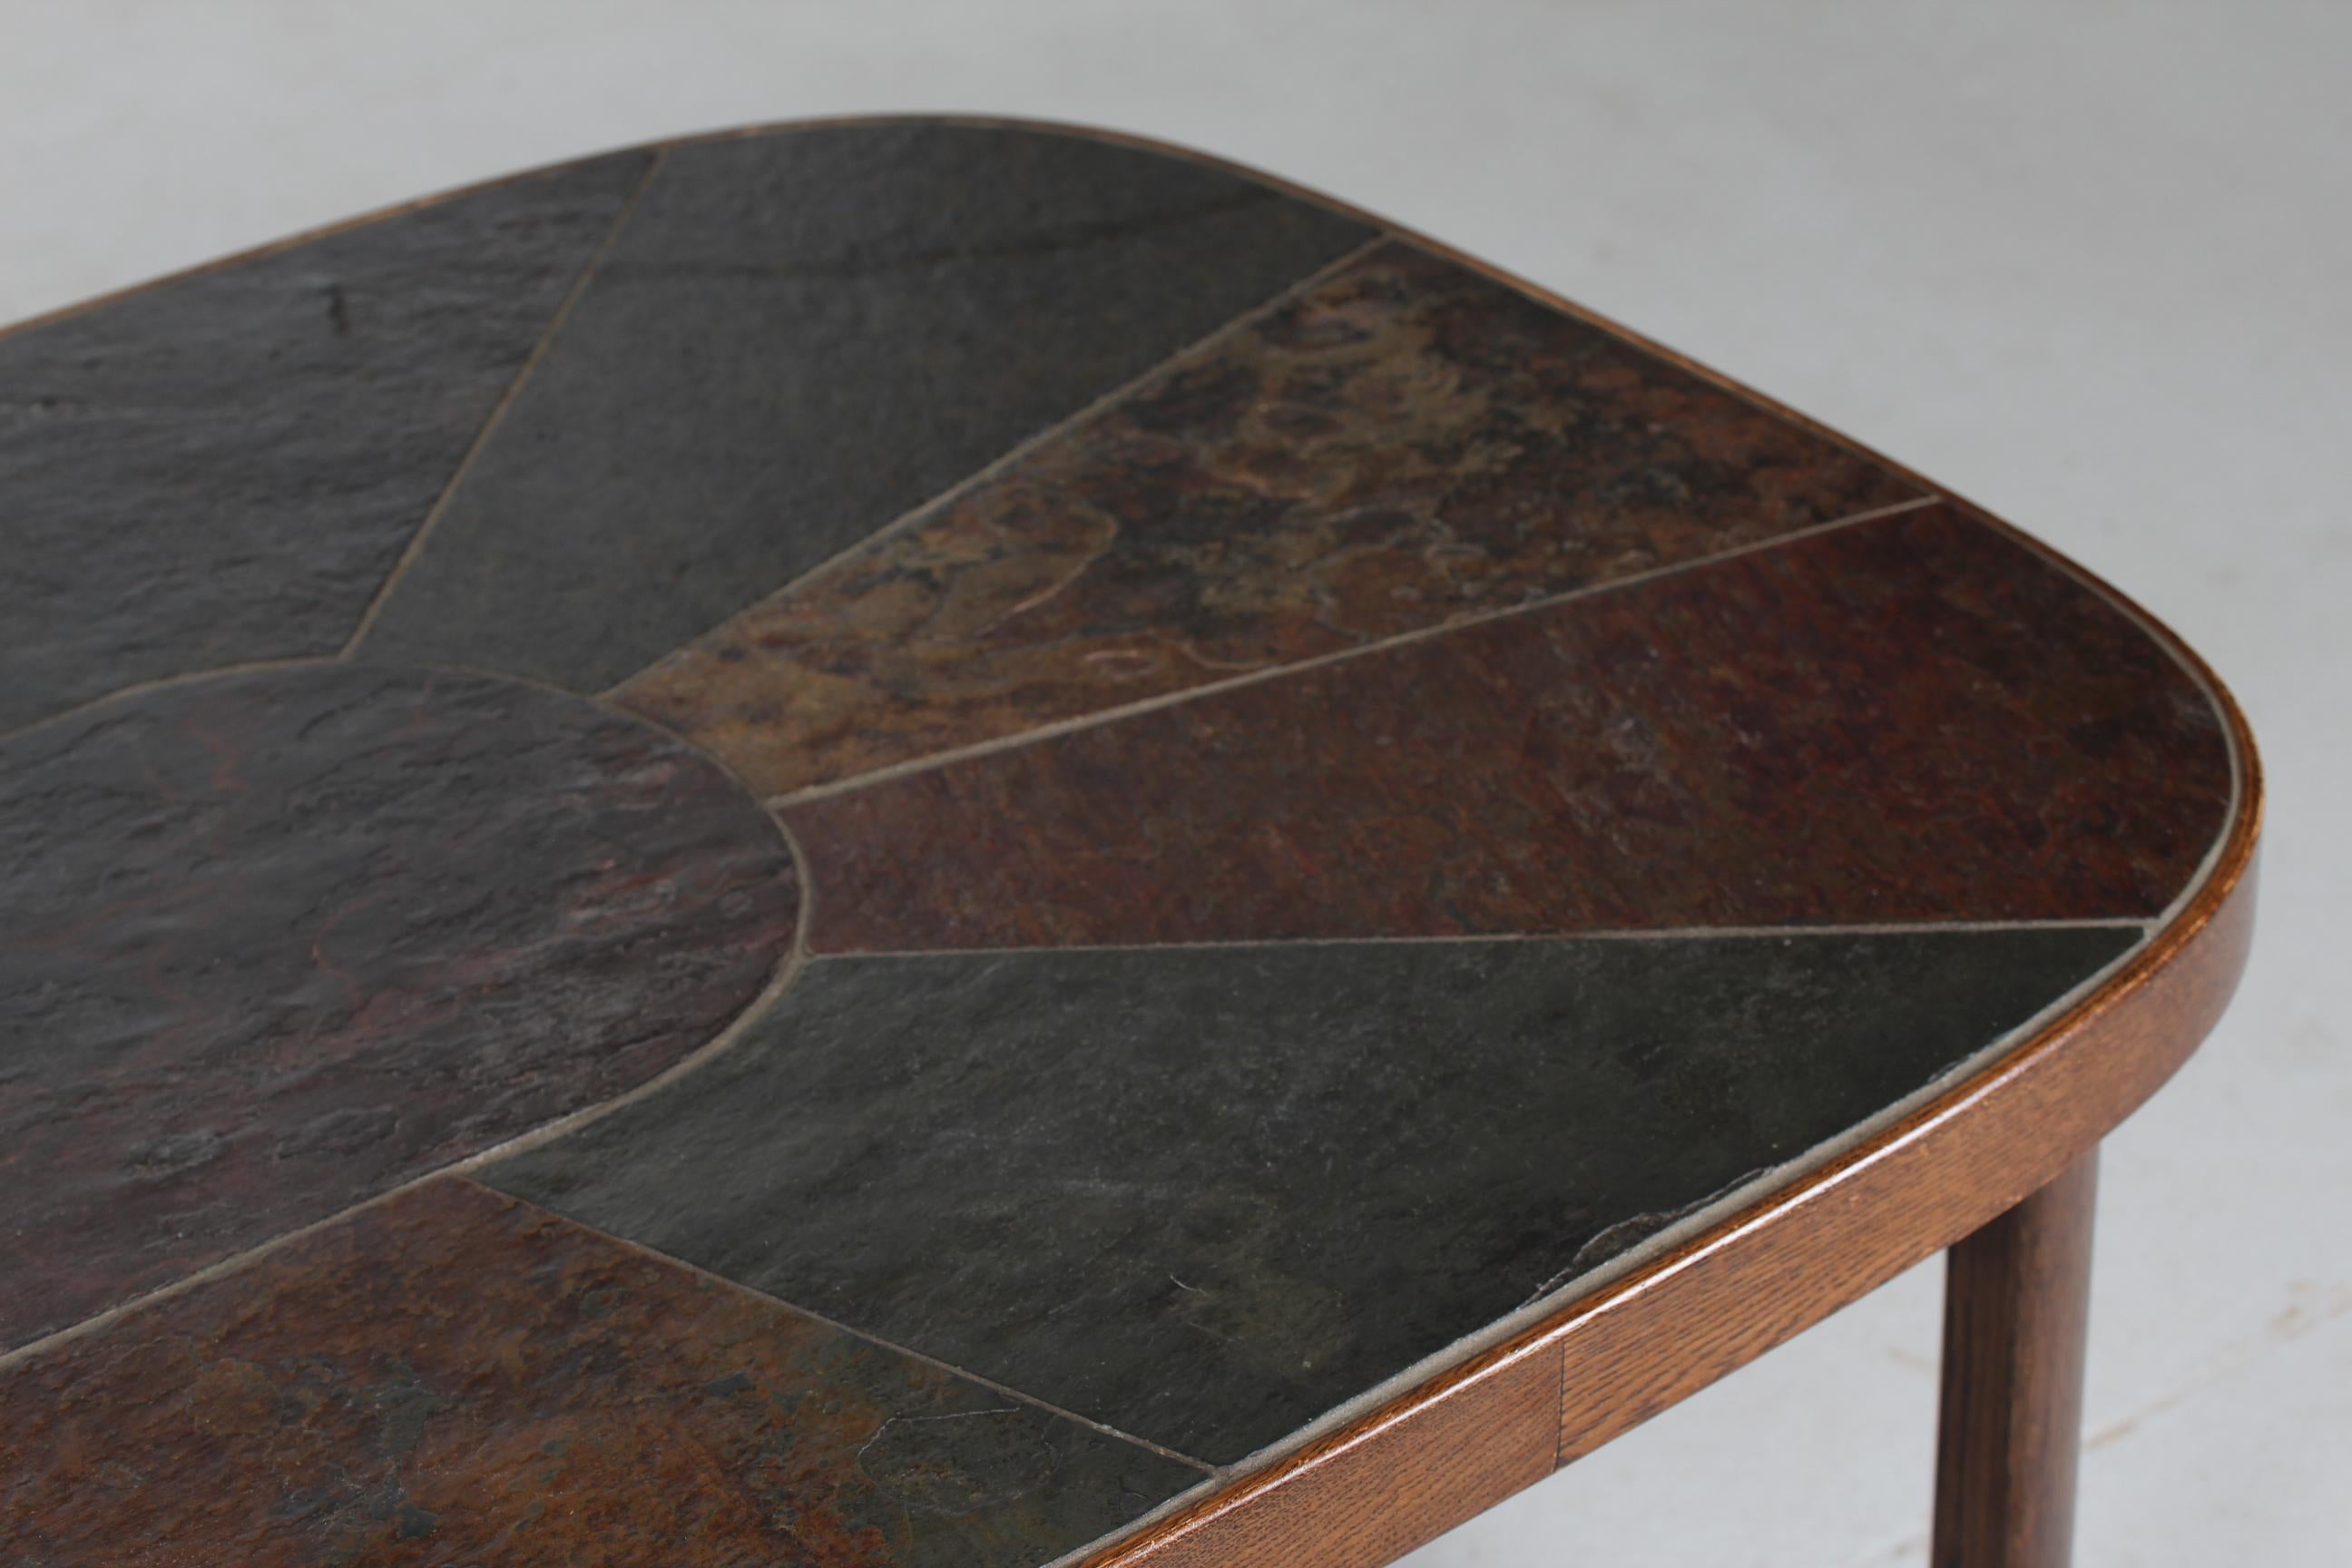 Brutalist Paul Kingma style slate-topped coffee table from the 1980s. 
The frame is made of dark stained oak with a table top of inlaid large pieces of dark coloured slate forms in a pattern

Length 140 cm
Width 80 cm
Height 53 cm

The table